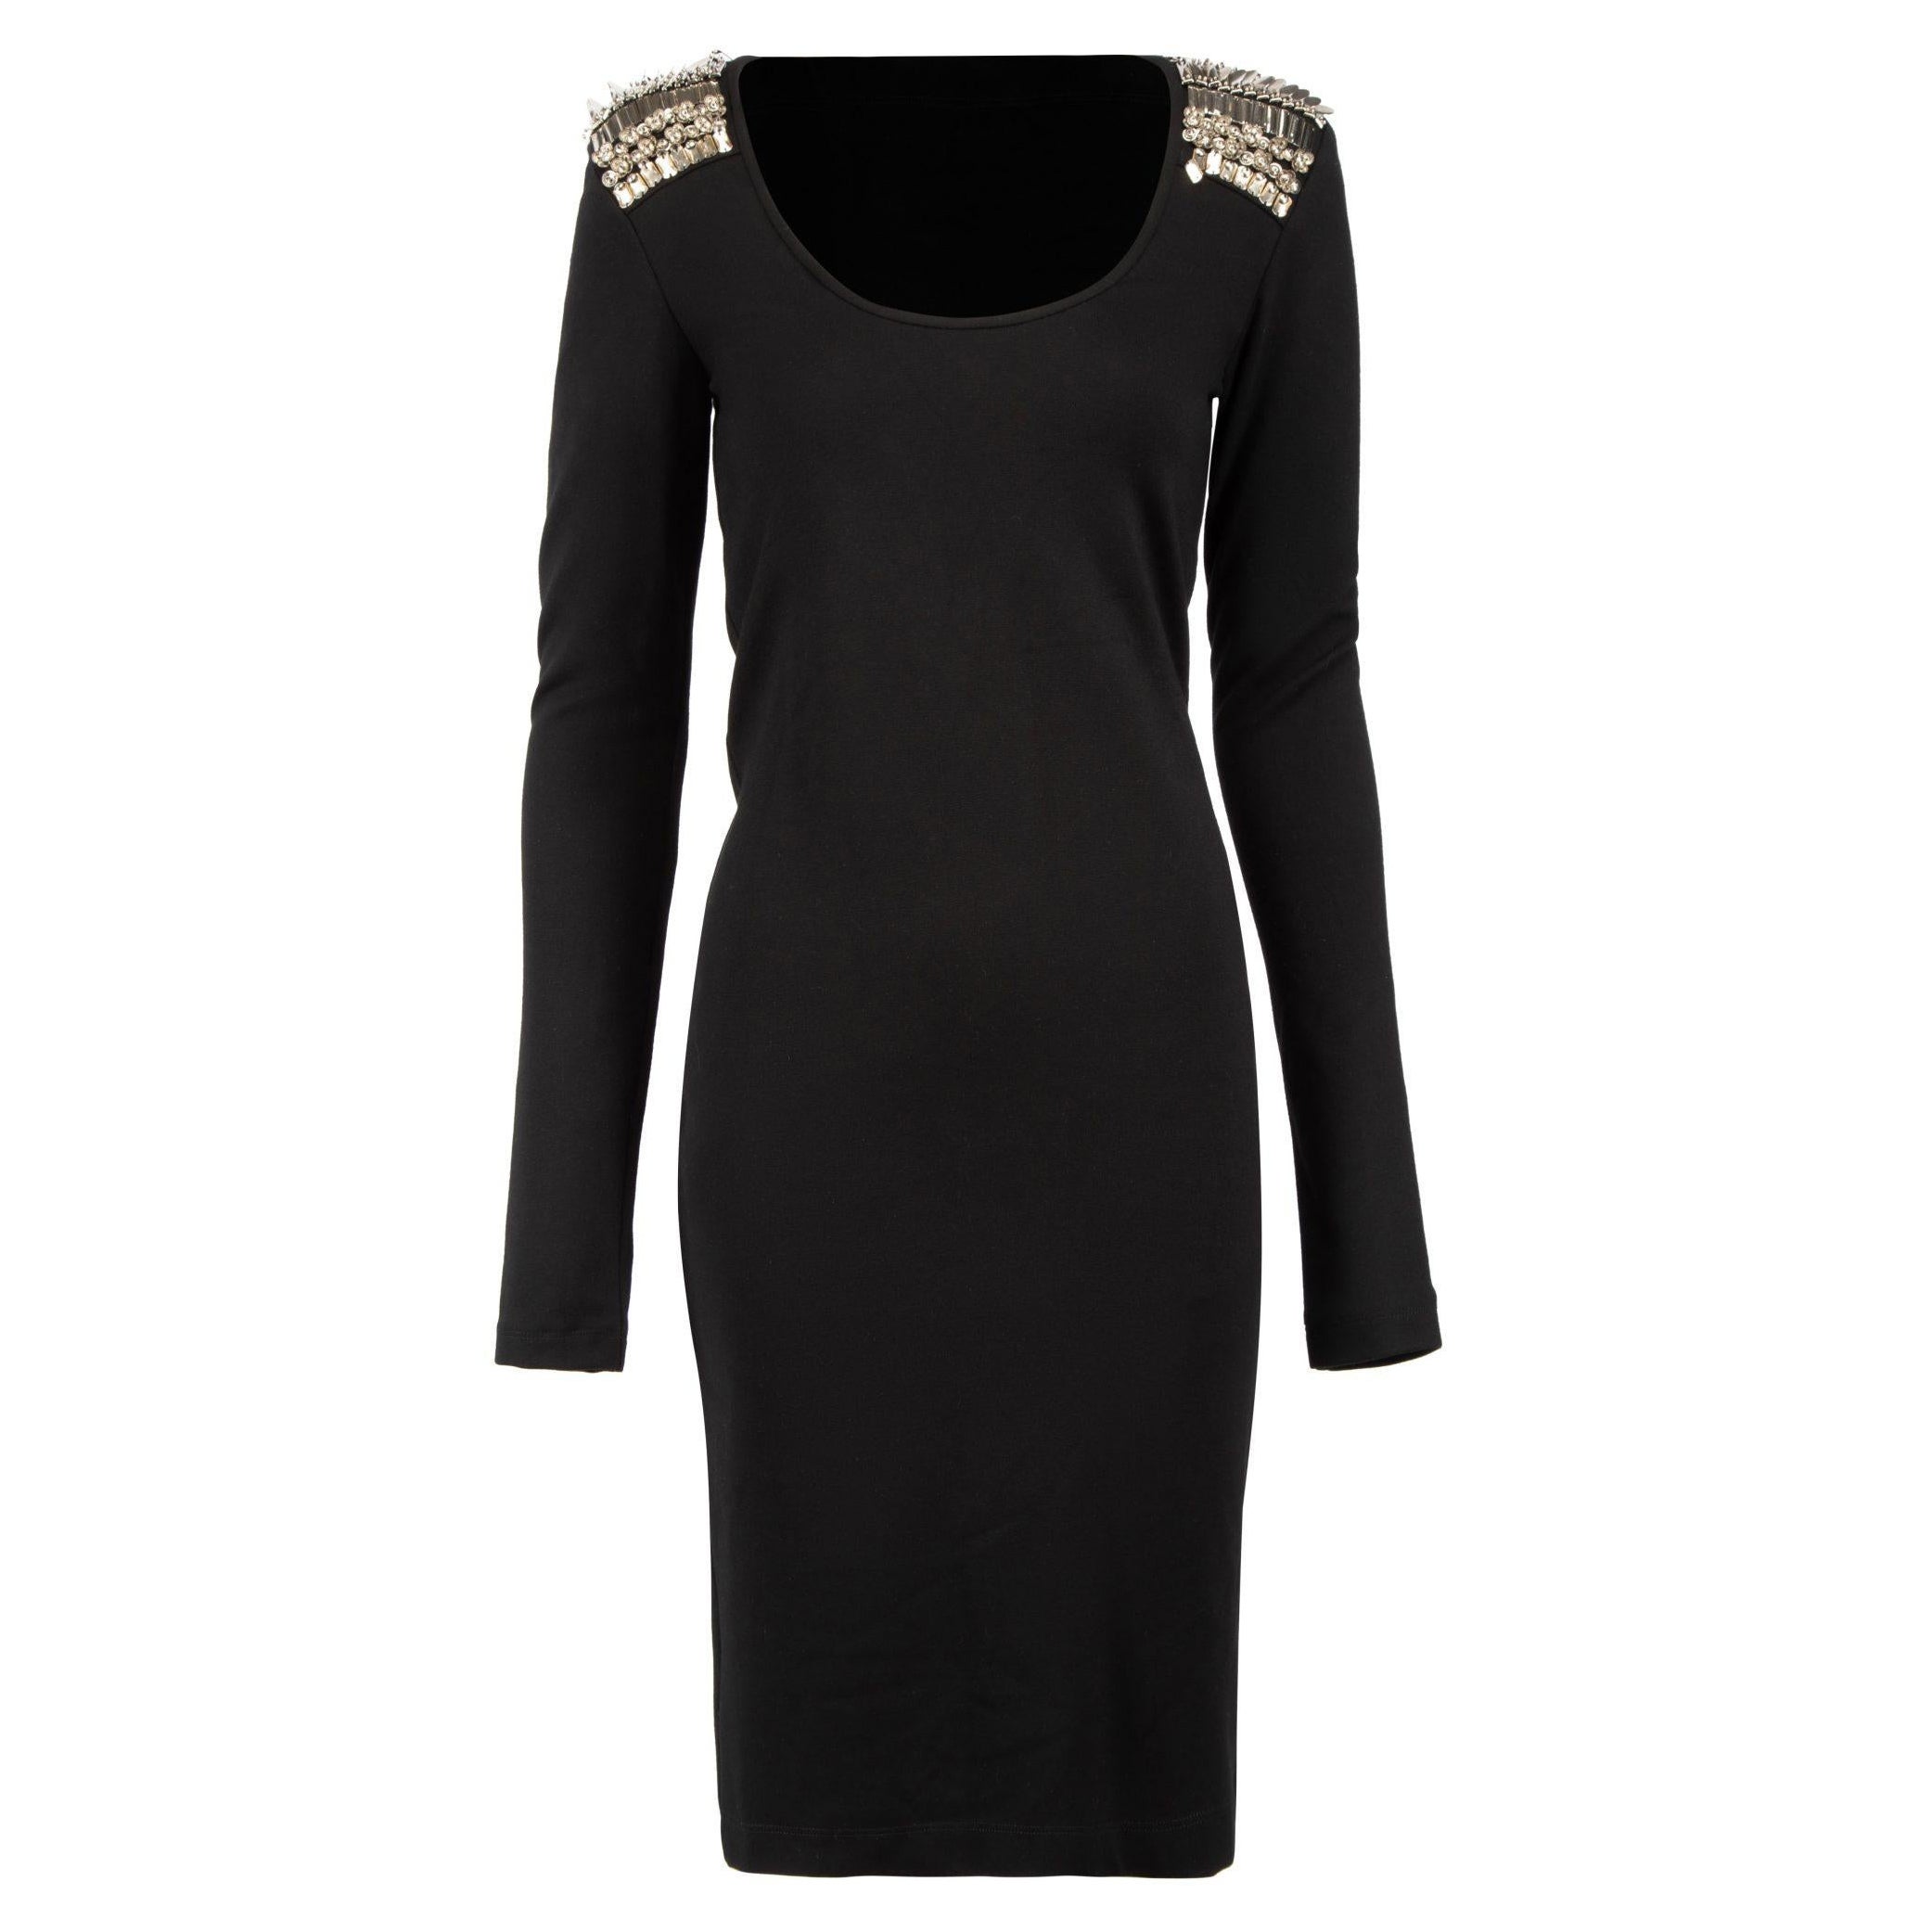 Alexander McQueen McQ 2013 Black Embellished Bodycon Dress Size M For Sale